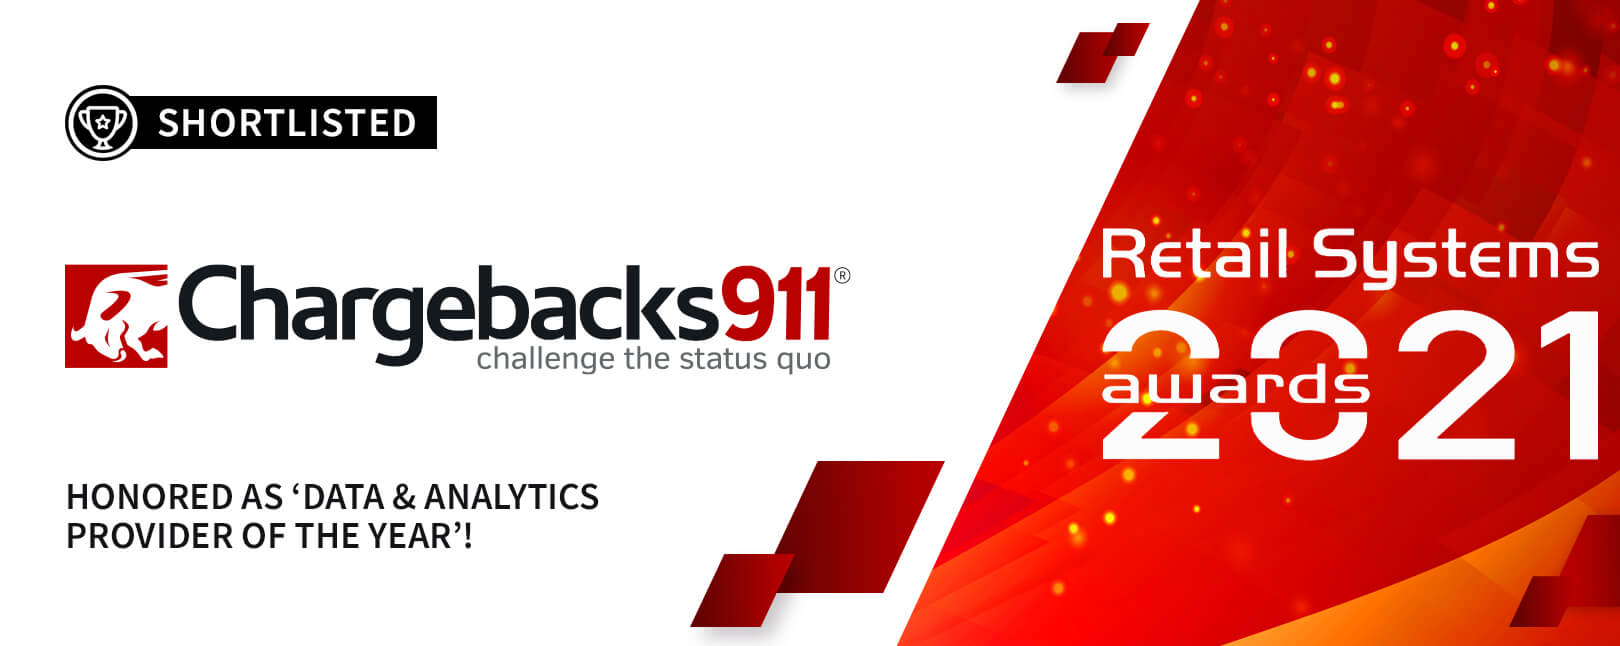 Chargebacks911® Honored as ‘Data & Analytics Provider of the Year’!